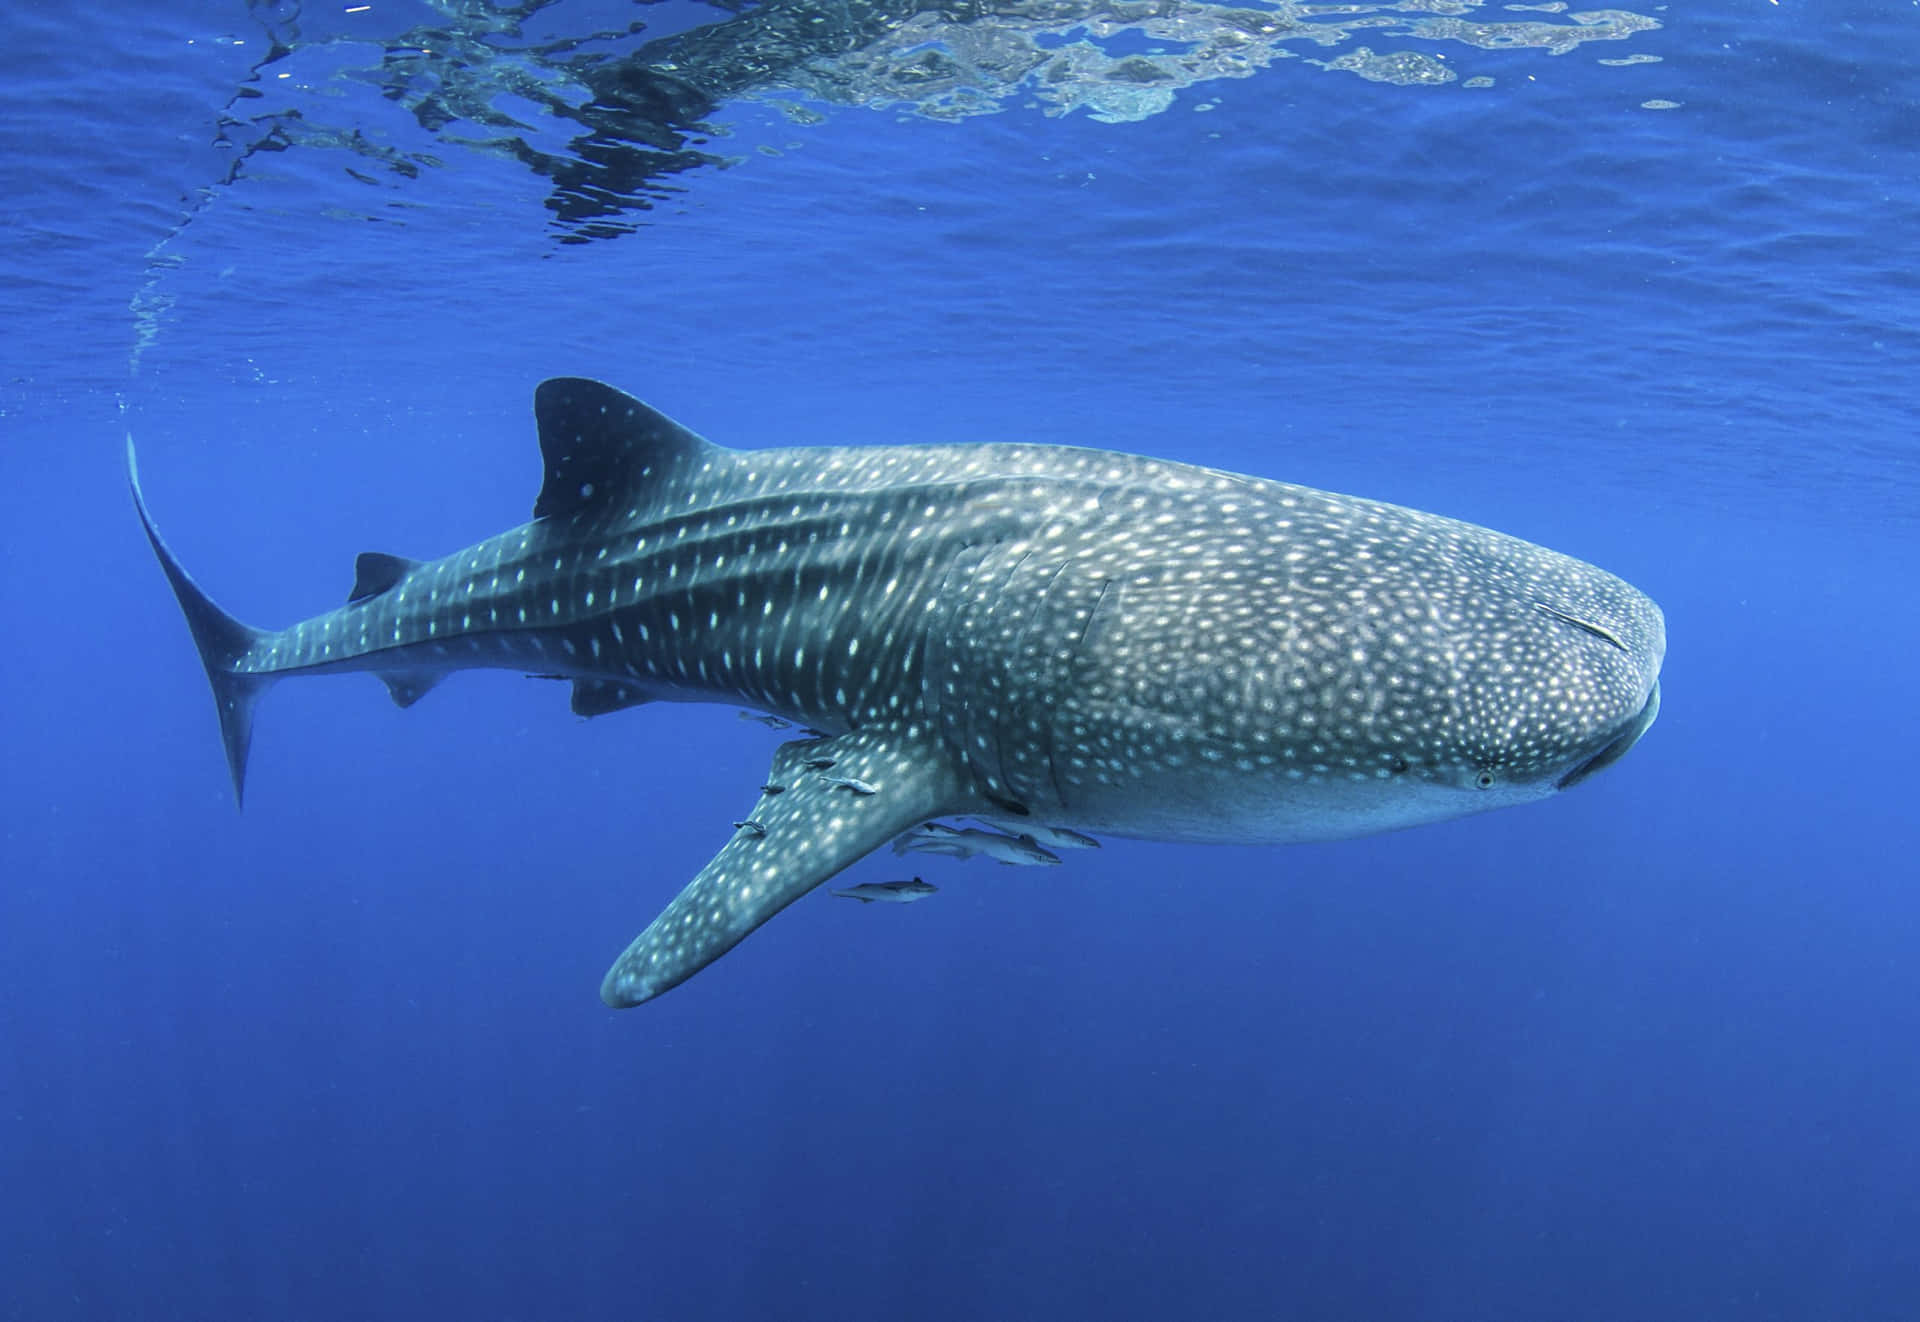 A whale shark swimming peacefully under the ocean